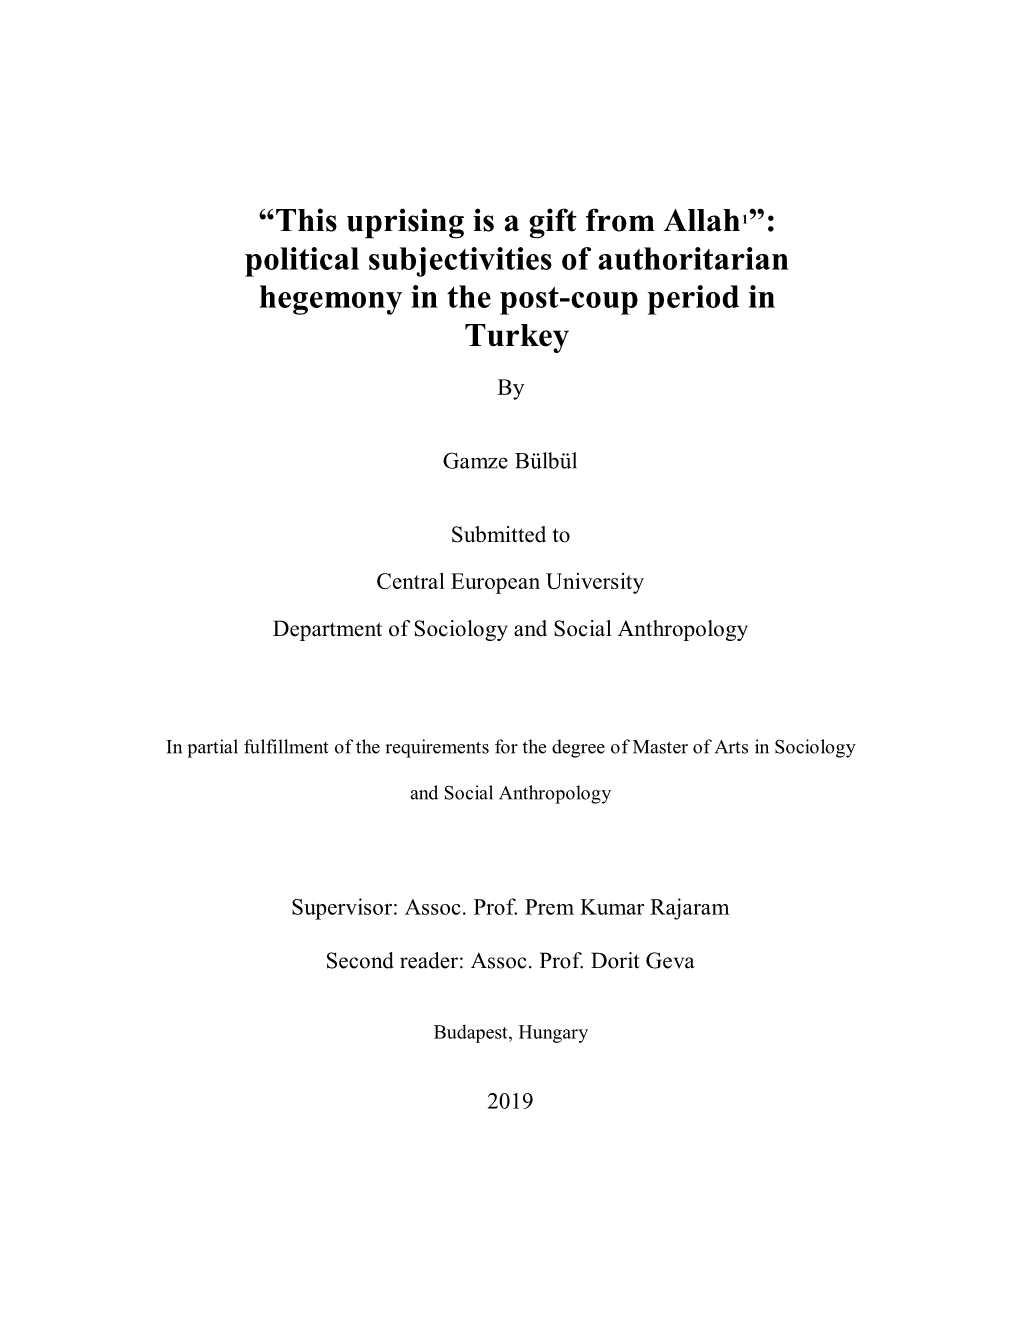 Political Subjectivities of Authoritarian Hegemony in the Post-Coup Period in Turkey